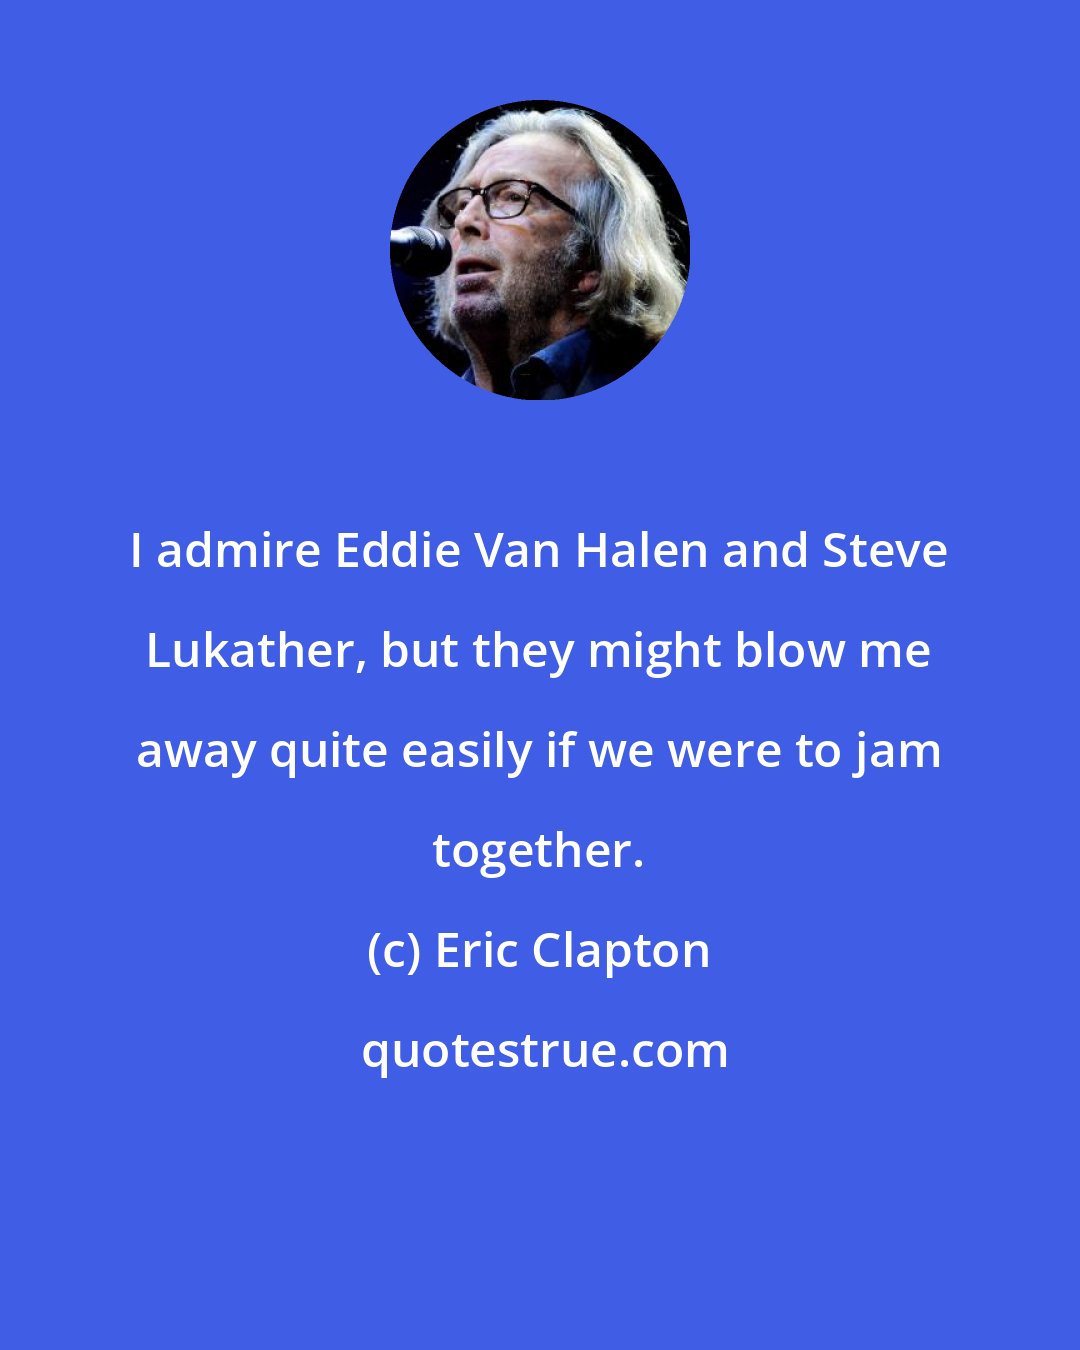 Eric Clapton: I admire Eddie Van Halen and Steve Lukather, but they might blow me away quite easily if we were to jam together.